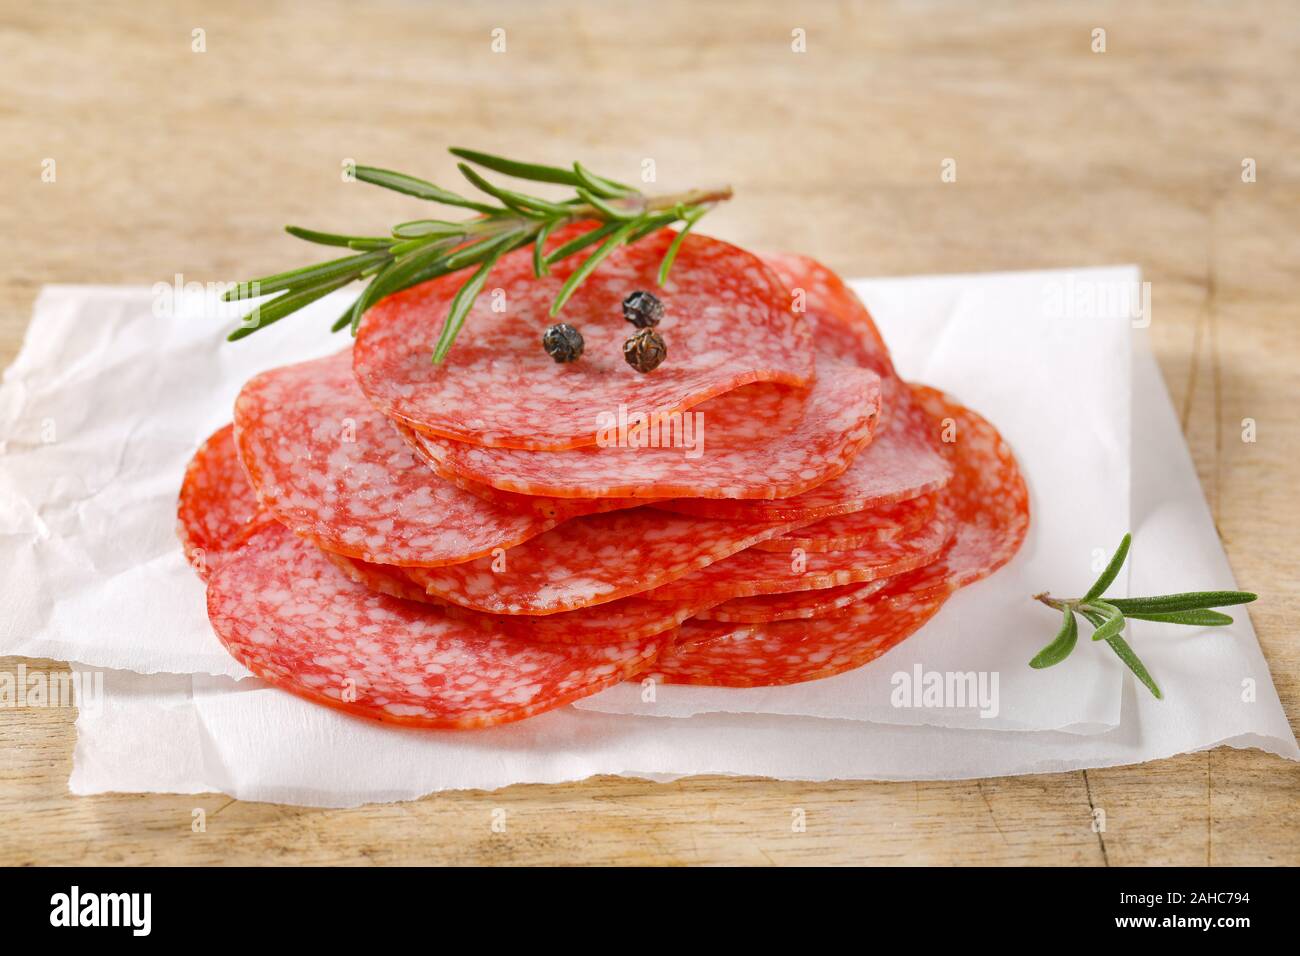 Download Sliced Salami Sausage On White Wax Paper Stock Photo Alamy Yellowimages Mockups